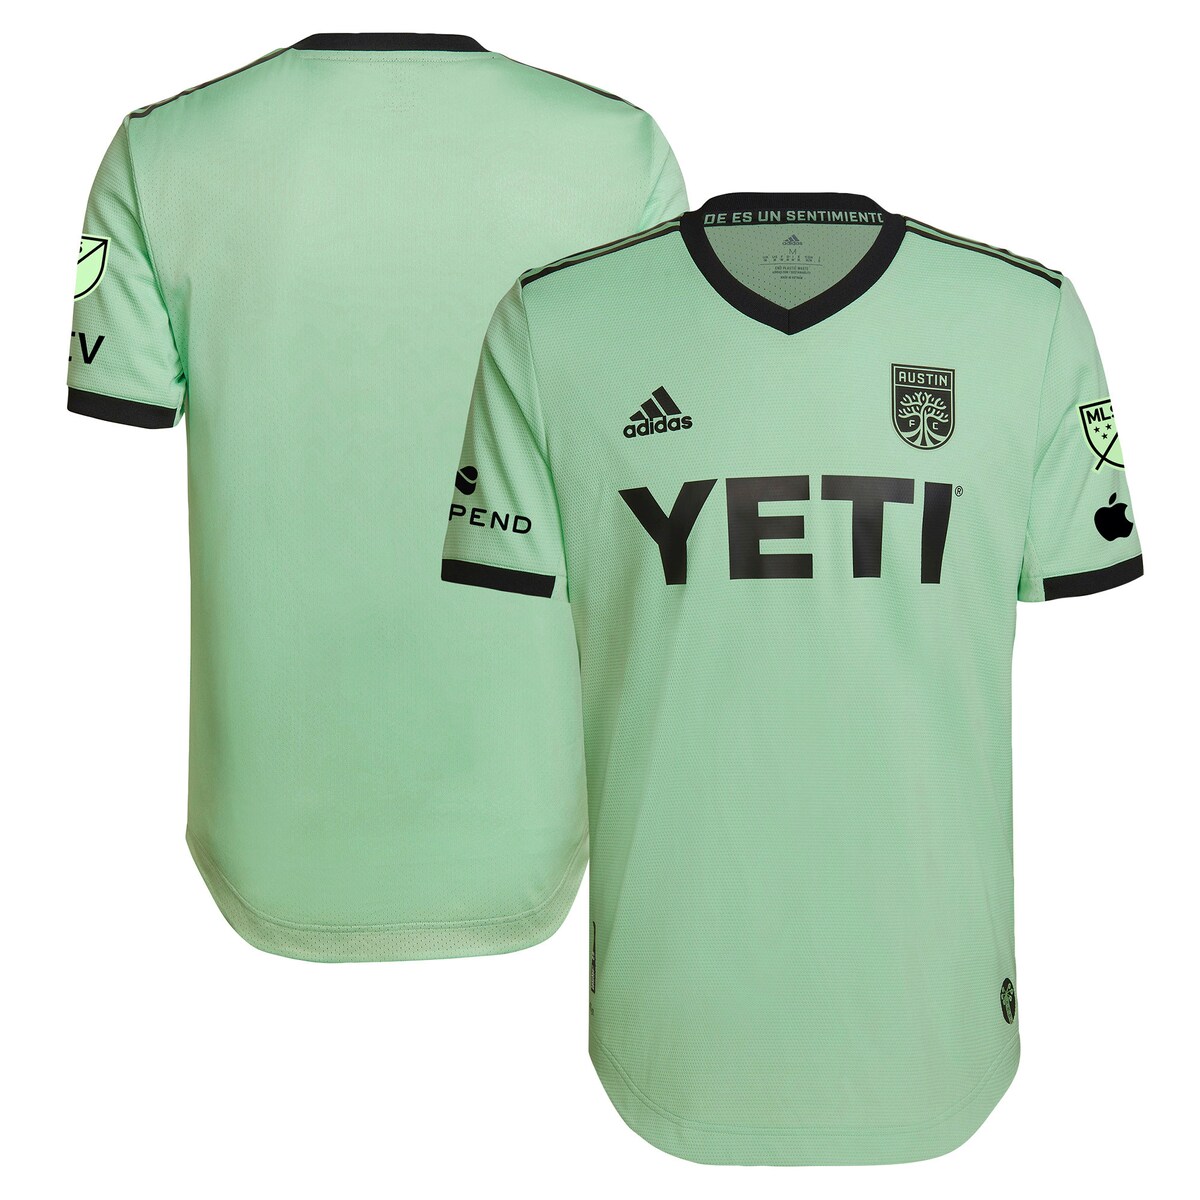 This 2023 The Sentimiento Kit Authentic Jersey from adidas reflects the idea that ''VERDE IS'' more than a color; it is a sentiment or a feeling that Austin FC fans have. The neck tape reads ''VERDE ES UN SENTIMIENTO'' and the jocktag features a moon tower, which is a significant piece of Austin and Austin FC history. The AEROREADY technology and ventilated, mesh panels work together to keep your young fan dry and comfortable all day long.Authentic JerseyHeat-sealed adidas logo on right chestMachine wash, tumble dry lowAEROREADY technology absorbs moisture and makes you feel dryMaterial: 100% PolyesterHeat-sealed team crest on left chestVentilated mesh panel insertsOfficially licensedImportedHeat-sealed sponsor logo on chestBrand: adidasShort sleeveTagless collar for added comfortBack neck taping -no irritating stitch on the back neck